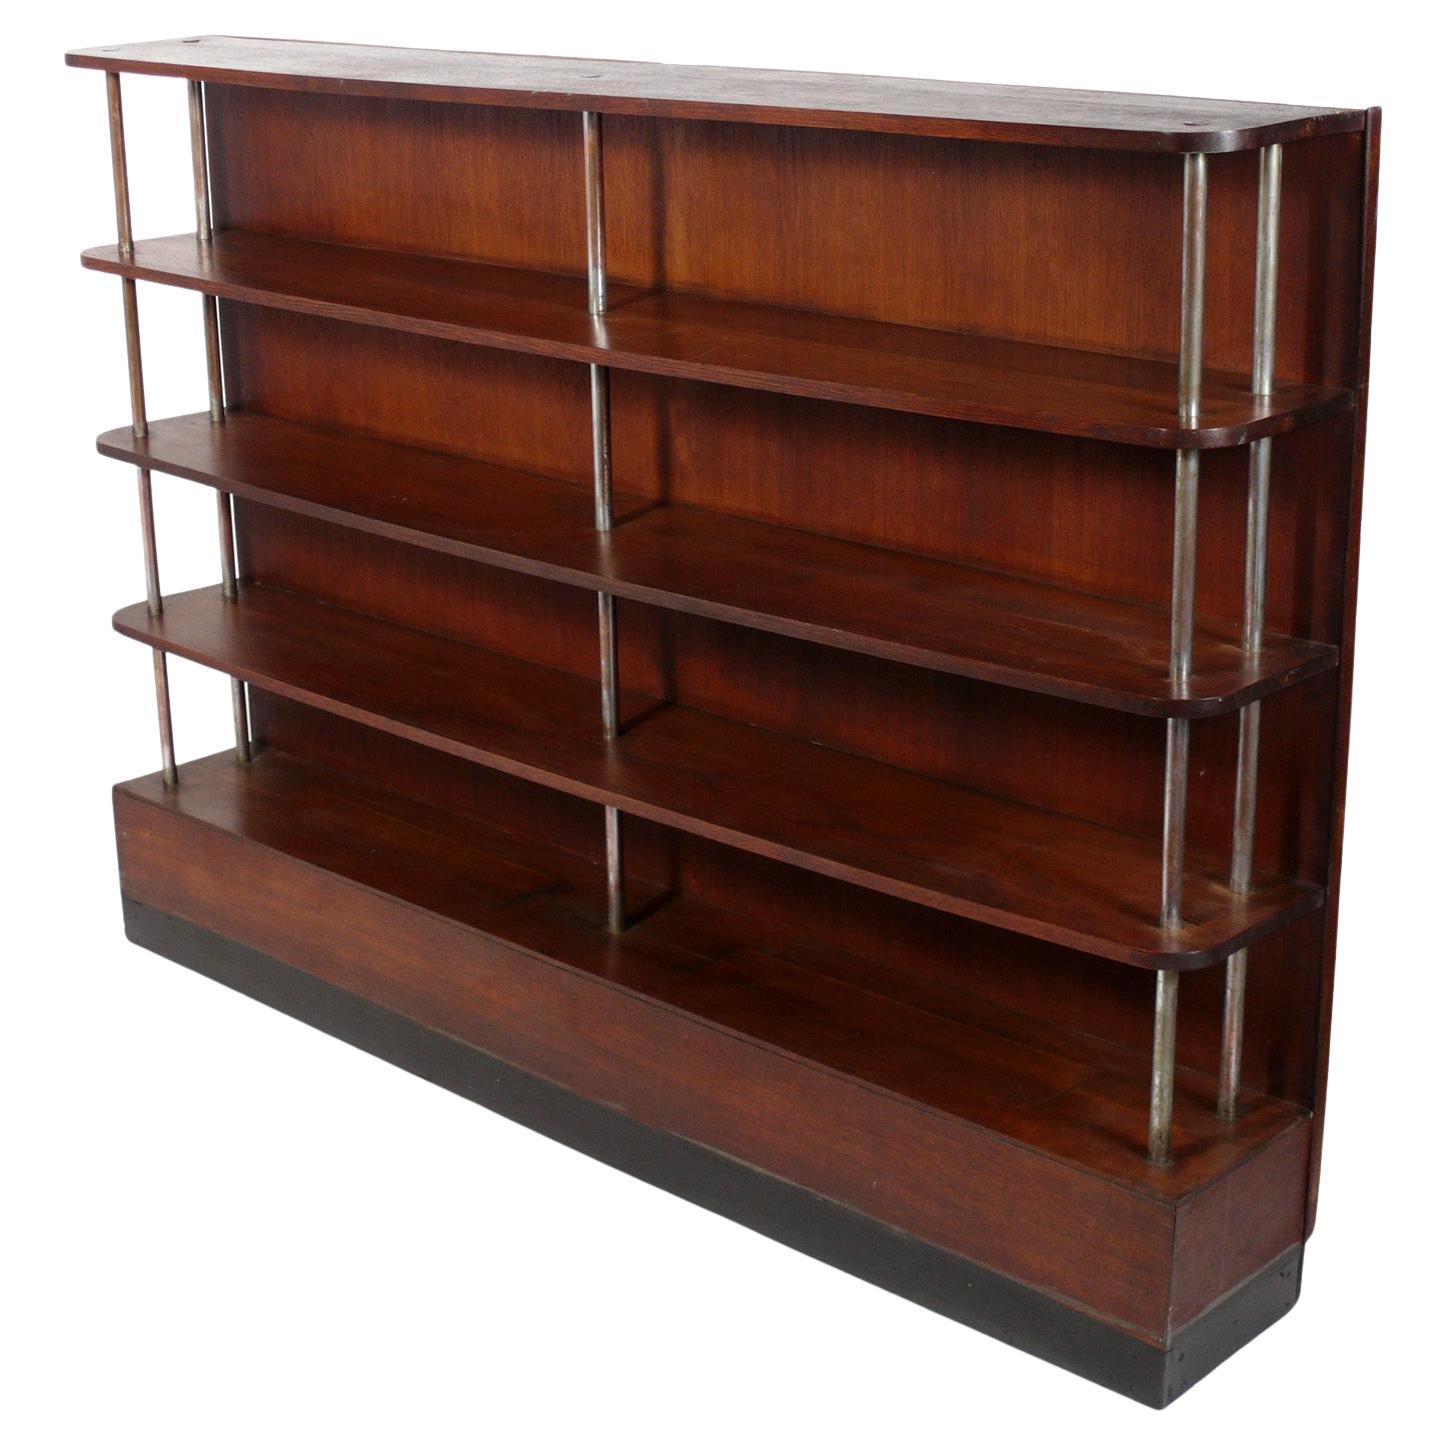 1930s Art Deco Bookshelf in the Manner of Gilbert Rohde Refinished For Sale